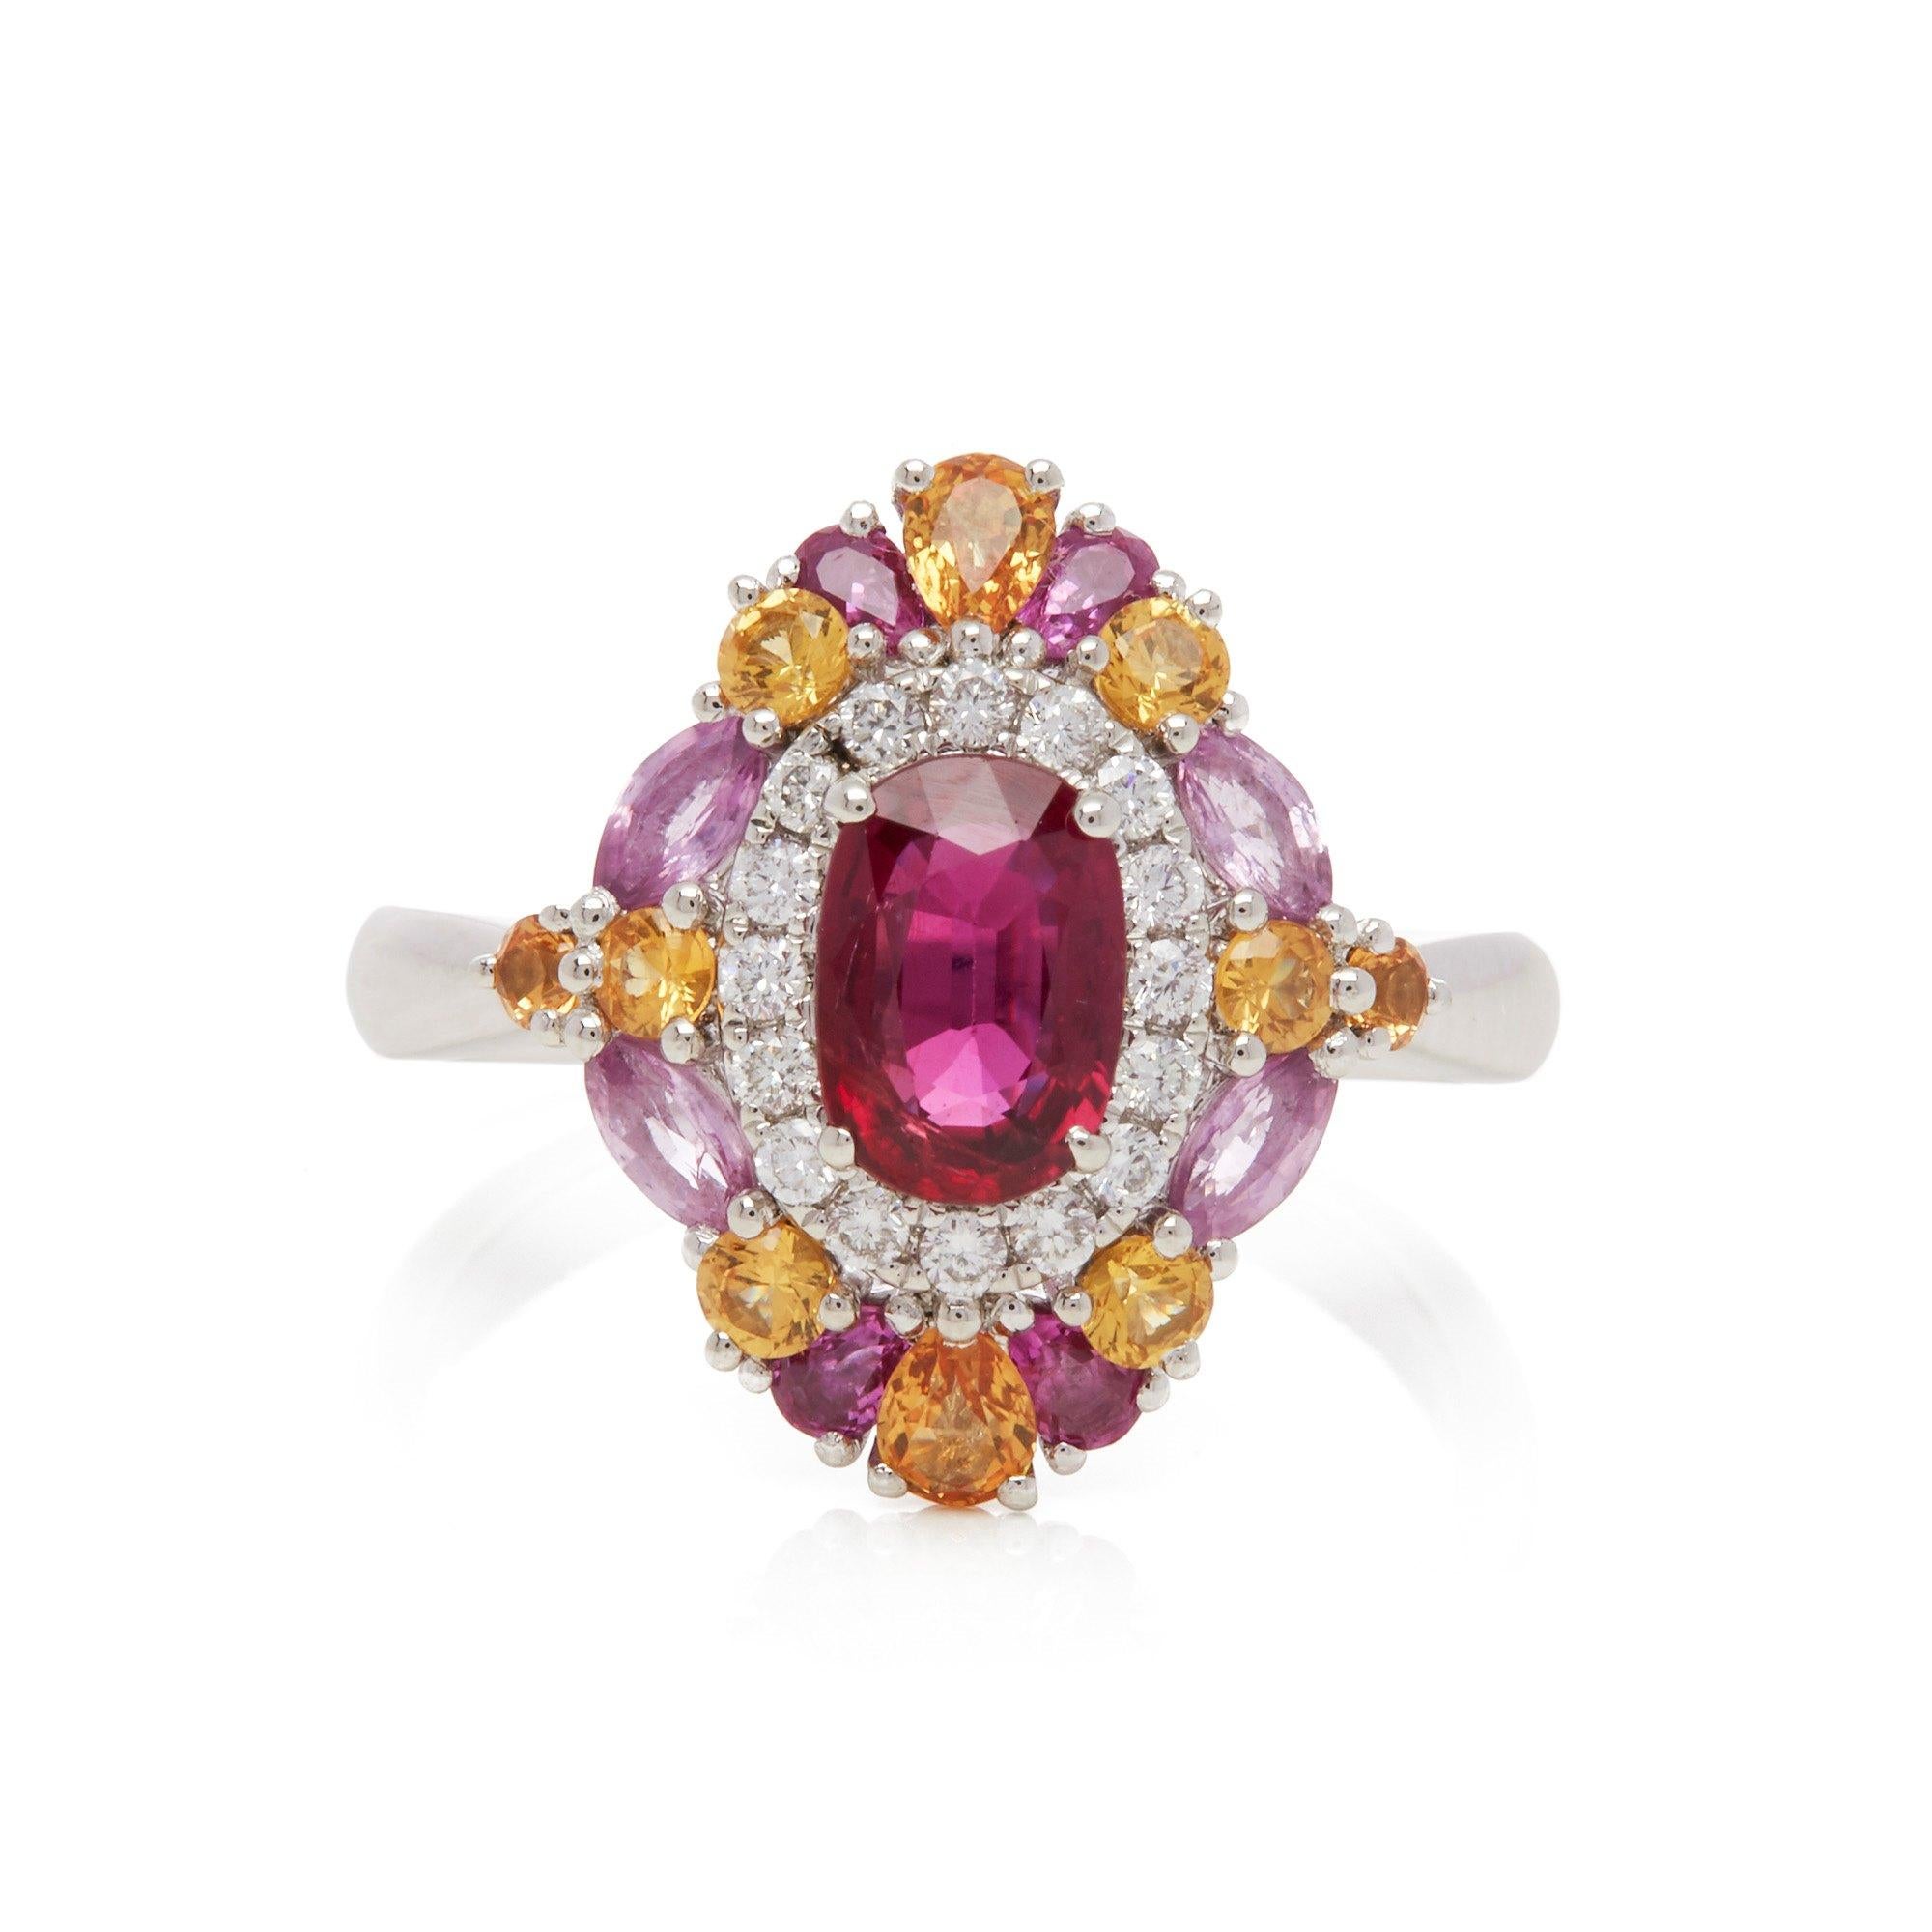 This ring designed by David Jerome is from his private collection and features one oval cut Ruby sourced in Mozambique. Set with a mix of round brilliant cut Diamonds, pink and yellow Sapphires totalling 1.70cts combined. Mounted in platinum. Ring